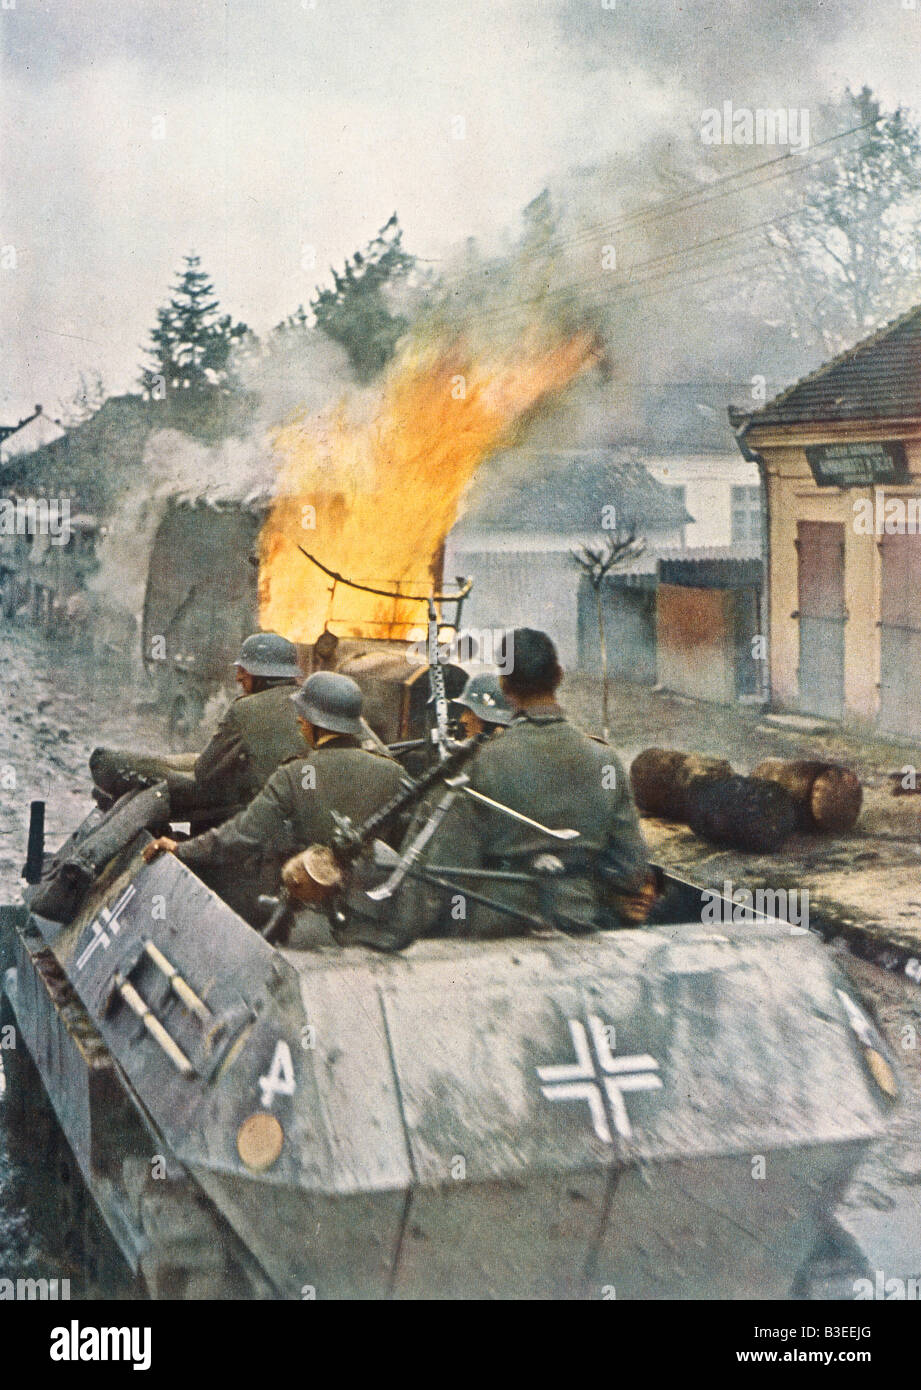 WWII, Eastern Front, Advance, 1941. Stock Photo